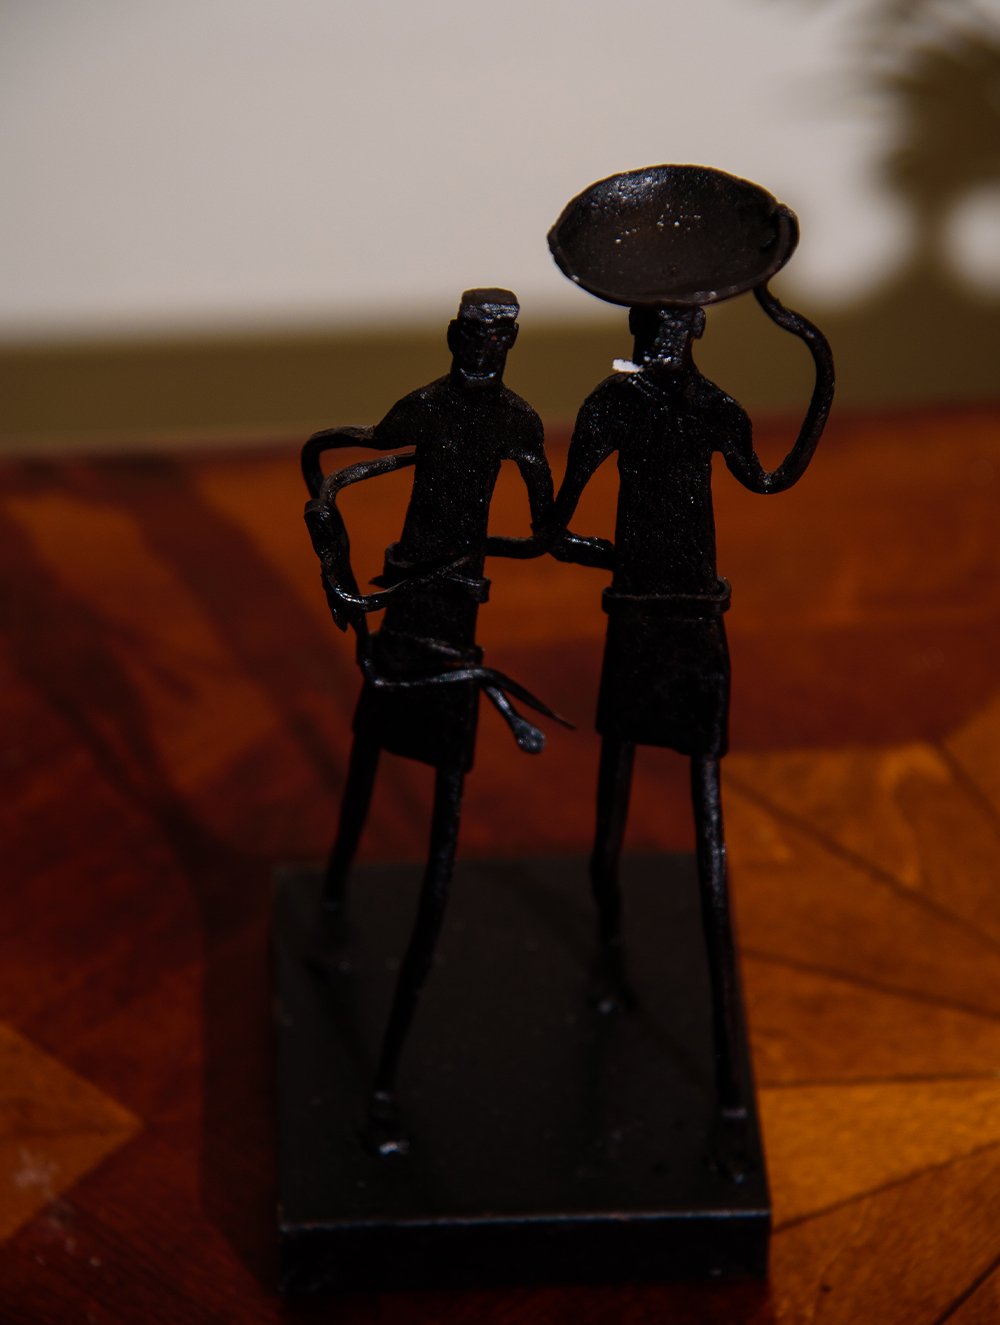 Load image into Gallery viewer, The India Craft House Bastar Tribal Two Men Candle Holder